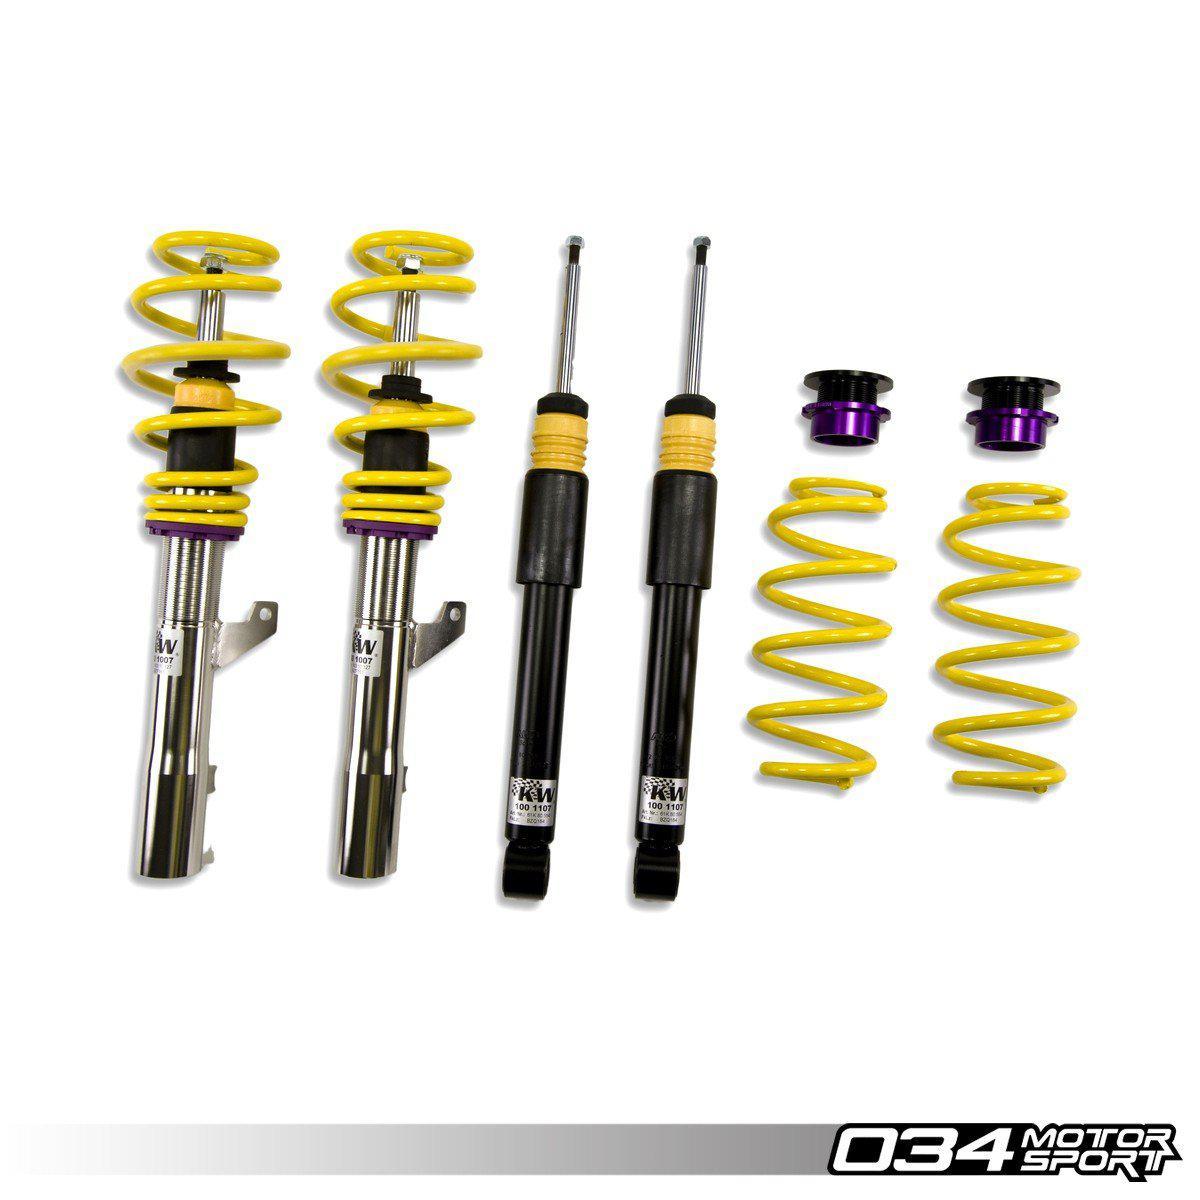 KW Variant 1 Coilover Suspension, B8 Audi A4/A5/S4/S5/RS5 FWD & Quattro Without Electronic Dampening-A Little Tuning Co